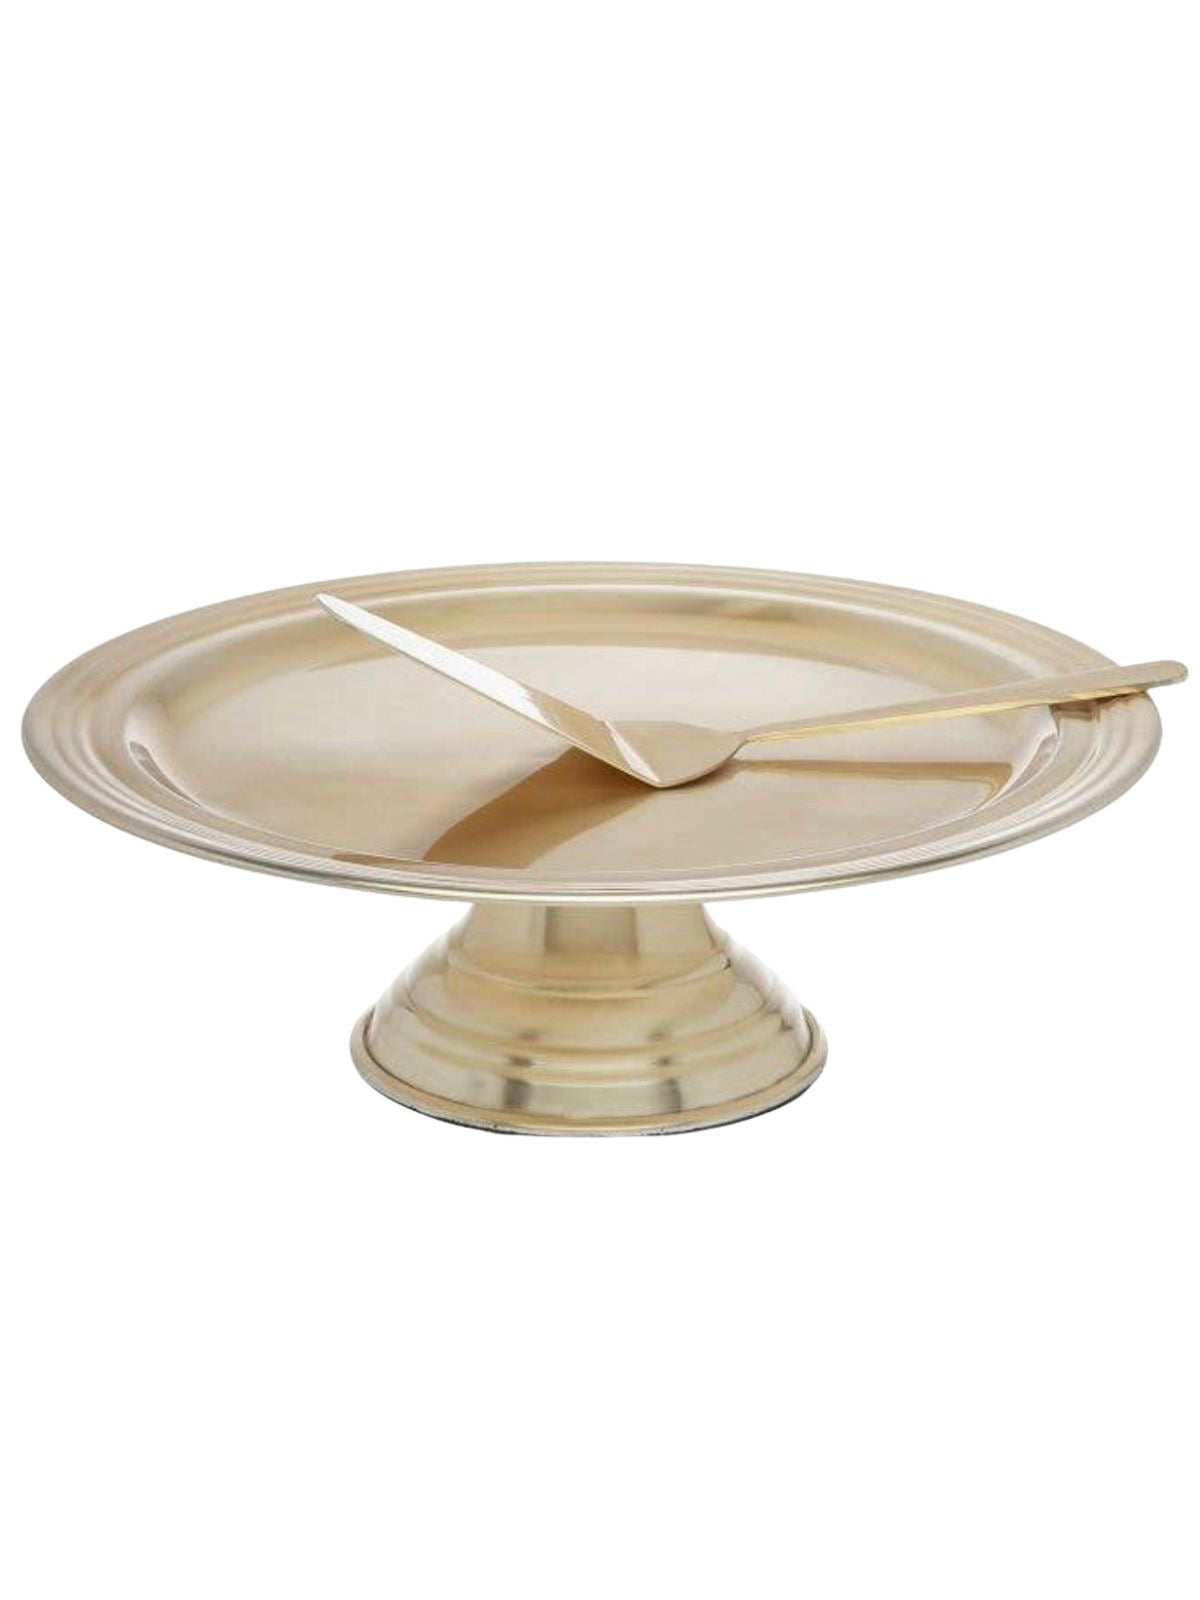 13D Stainless Steel Champagne Gold Footed Cake Plate sold by KYA Home Decor.